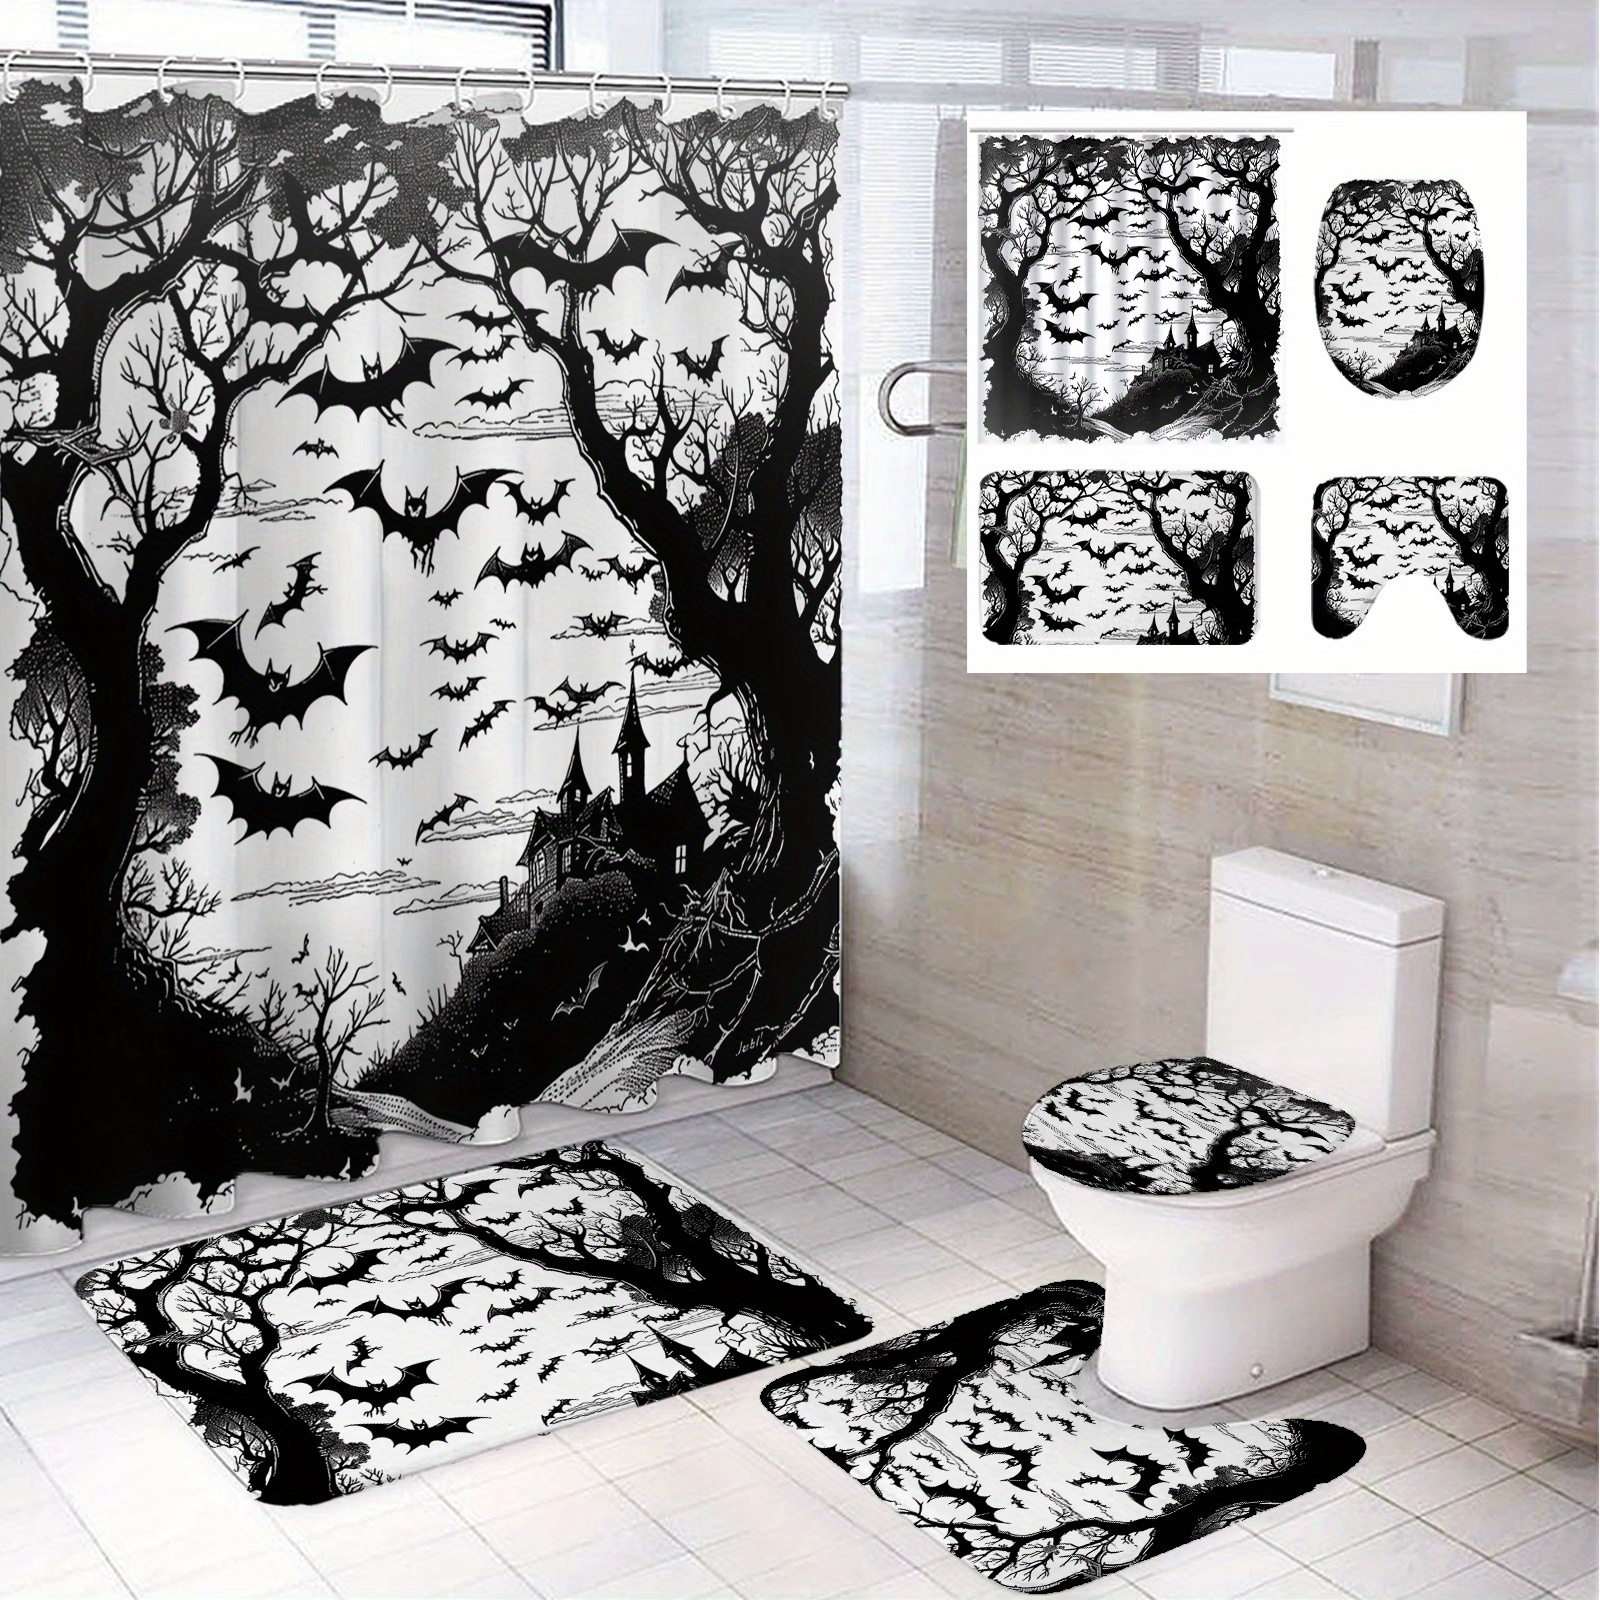 

Spooky Halloween Bathroom Set: Black Bat-themed Shower Curtain, Rug, Toilet Seat Cover, And U-shaped Mat - Perfect For 12-14 Year Olds - Waterproof And Artistic Design